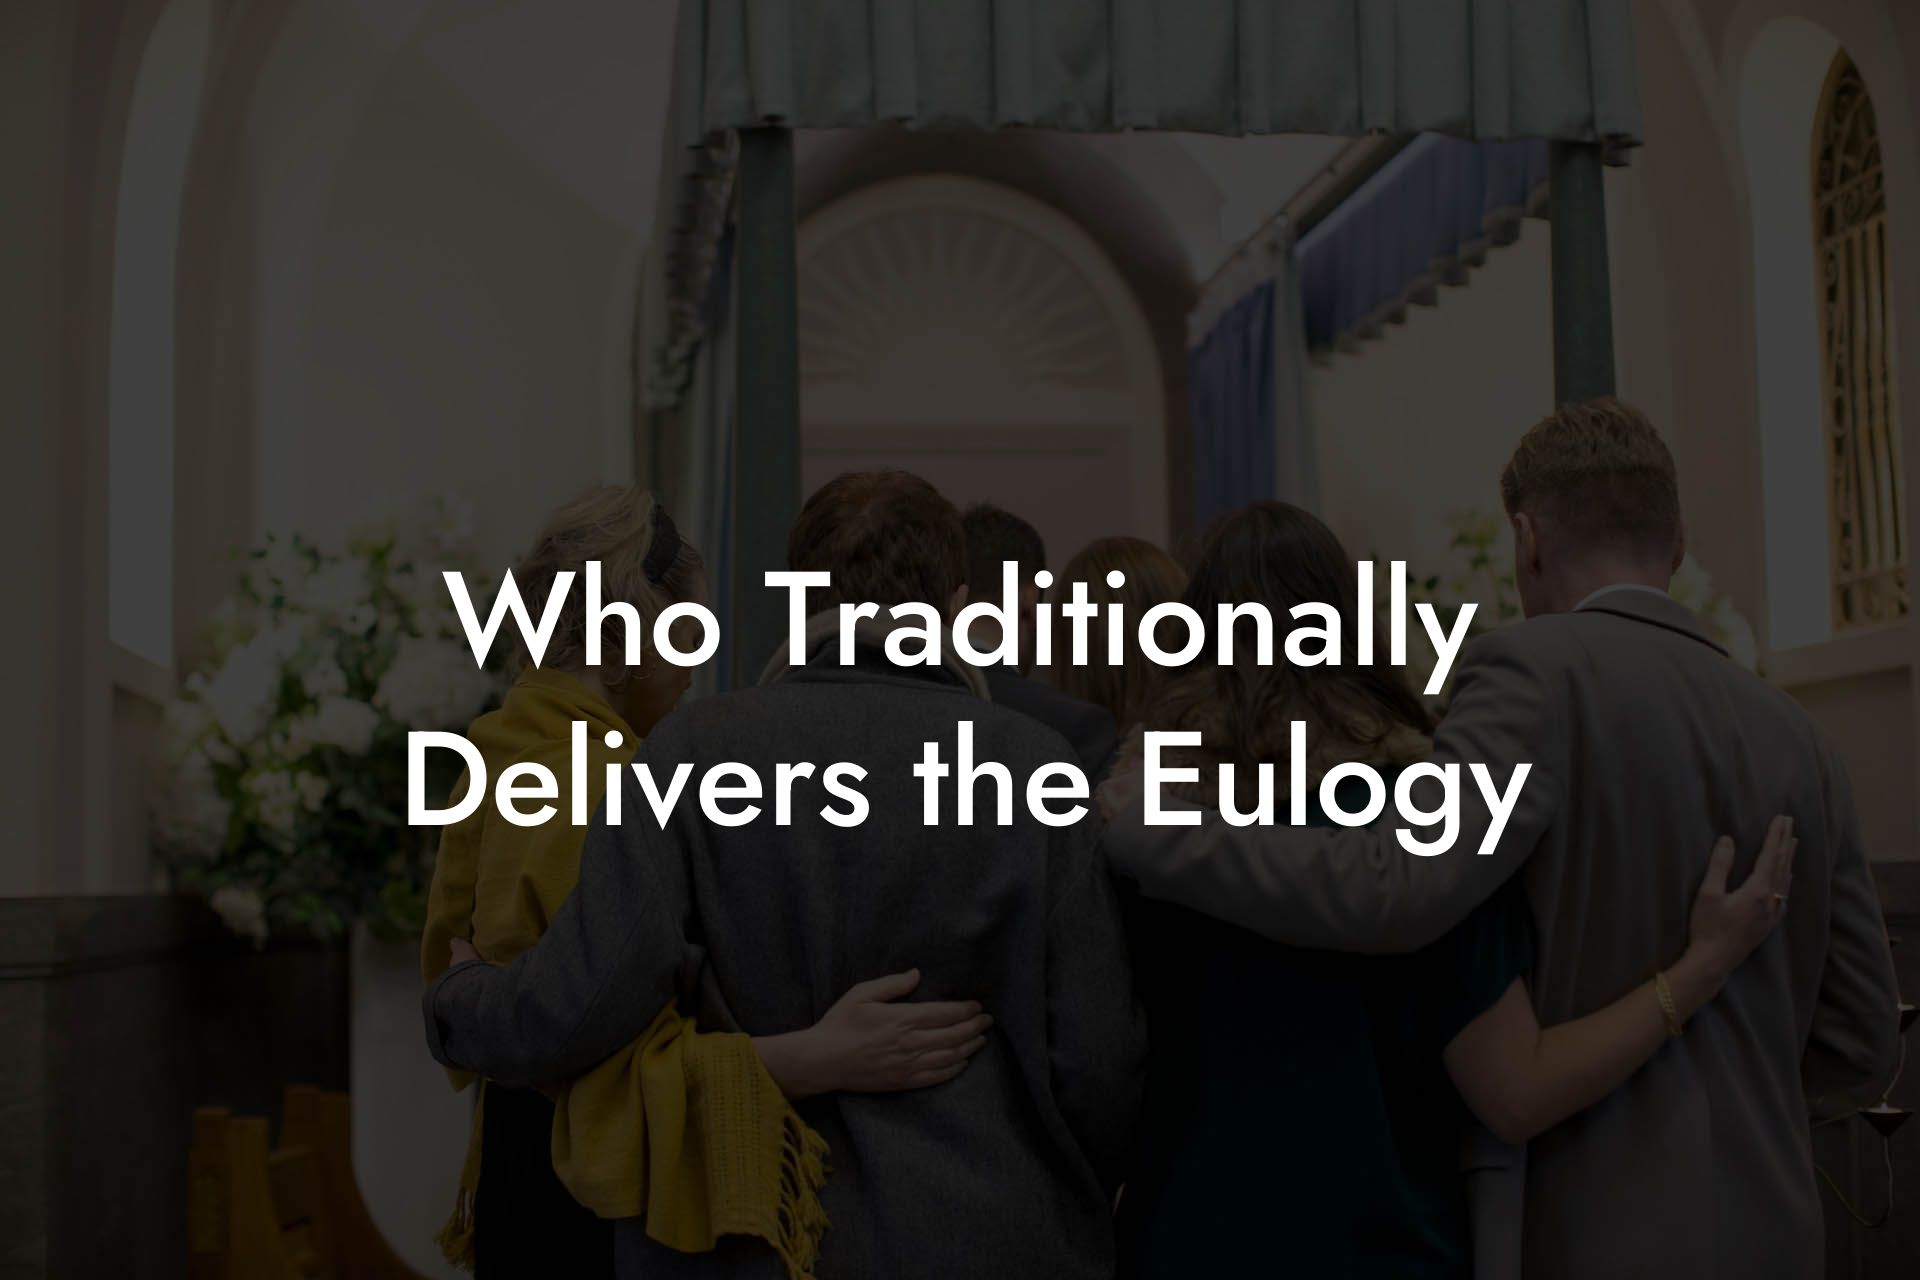 Who Traditionally Delivers the Eulogy